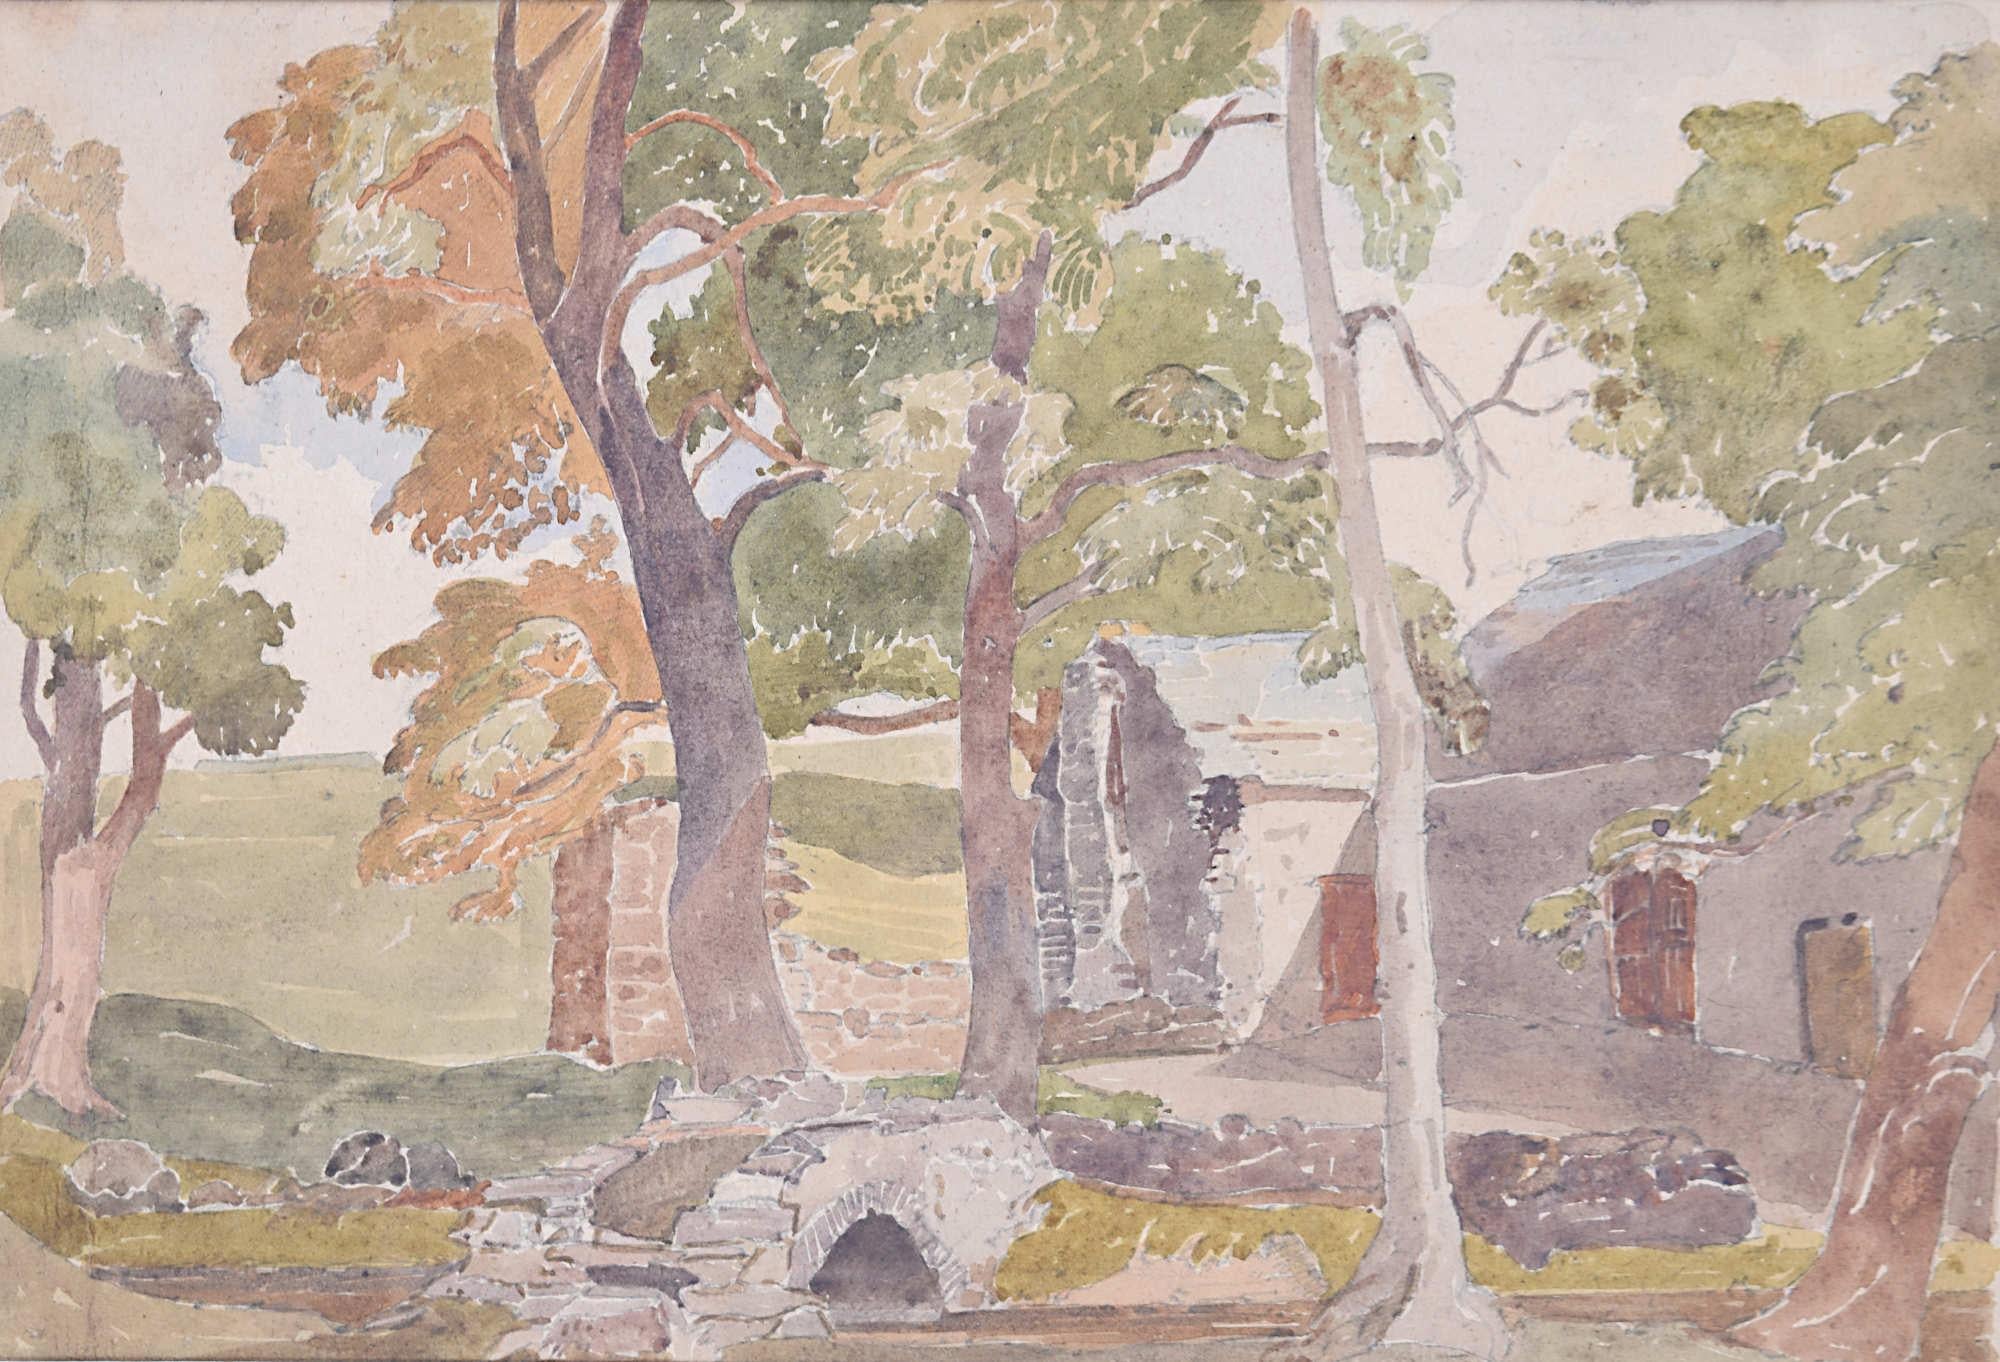 We acquired a series of paintings from Claude Muncaster's studio. To find more scroll down to "More from this Seller" and below it click on "See all from this seller." 

Claude Muncaster (1903-1974)
Shap Farmhouse
Signed and inscribed to